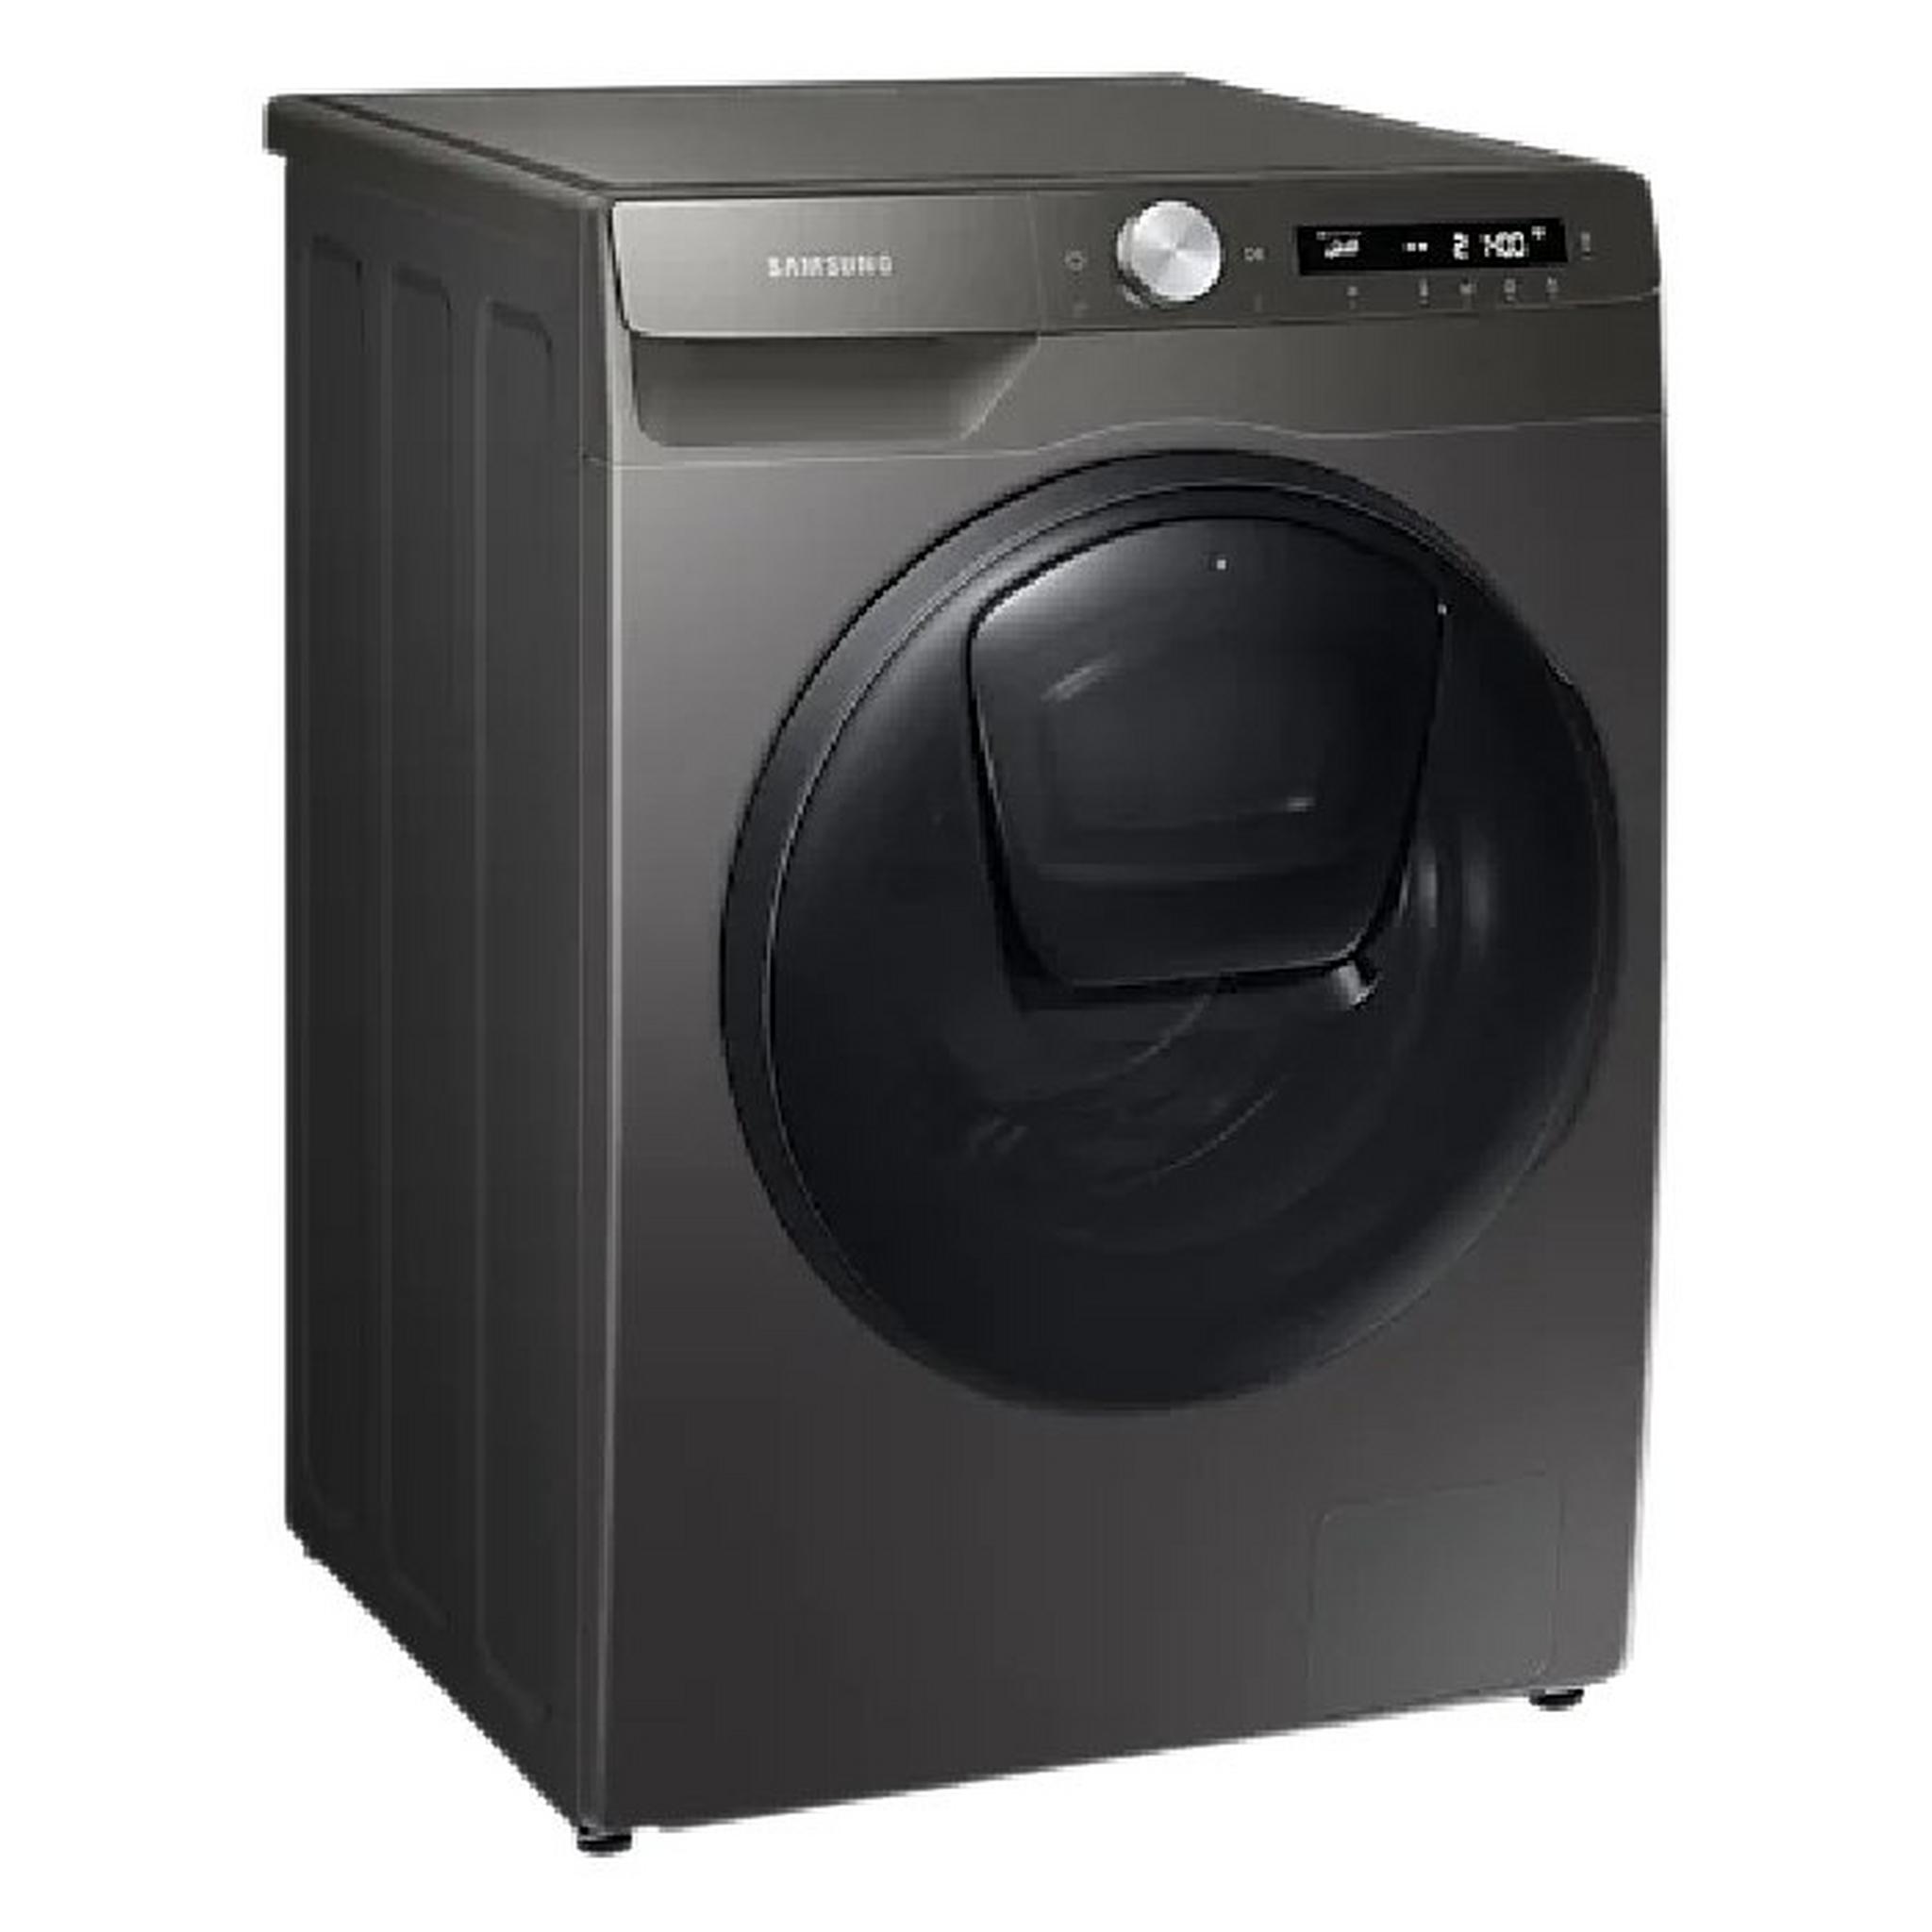 Samsung  AI Controlled Washer/Dryer10 kg Washing Capacity and 7Kg Drying Capacity WD10T554DBN -